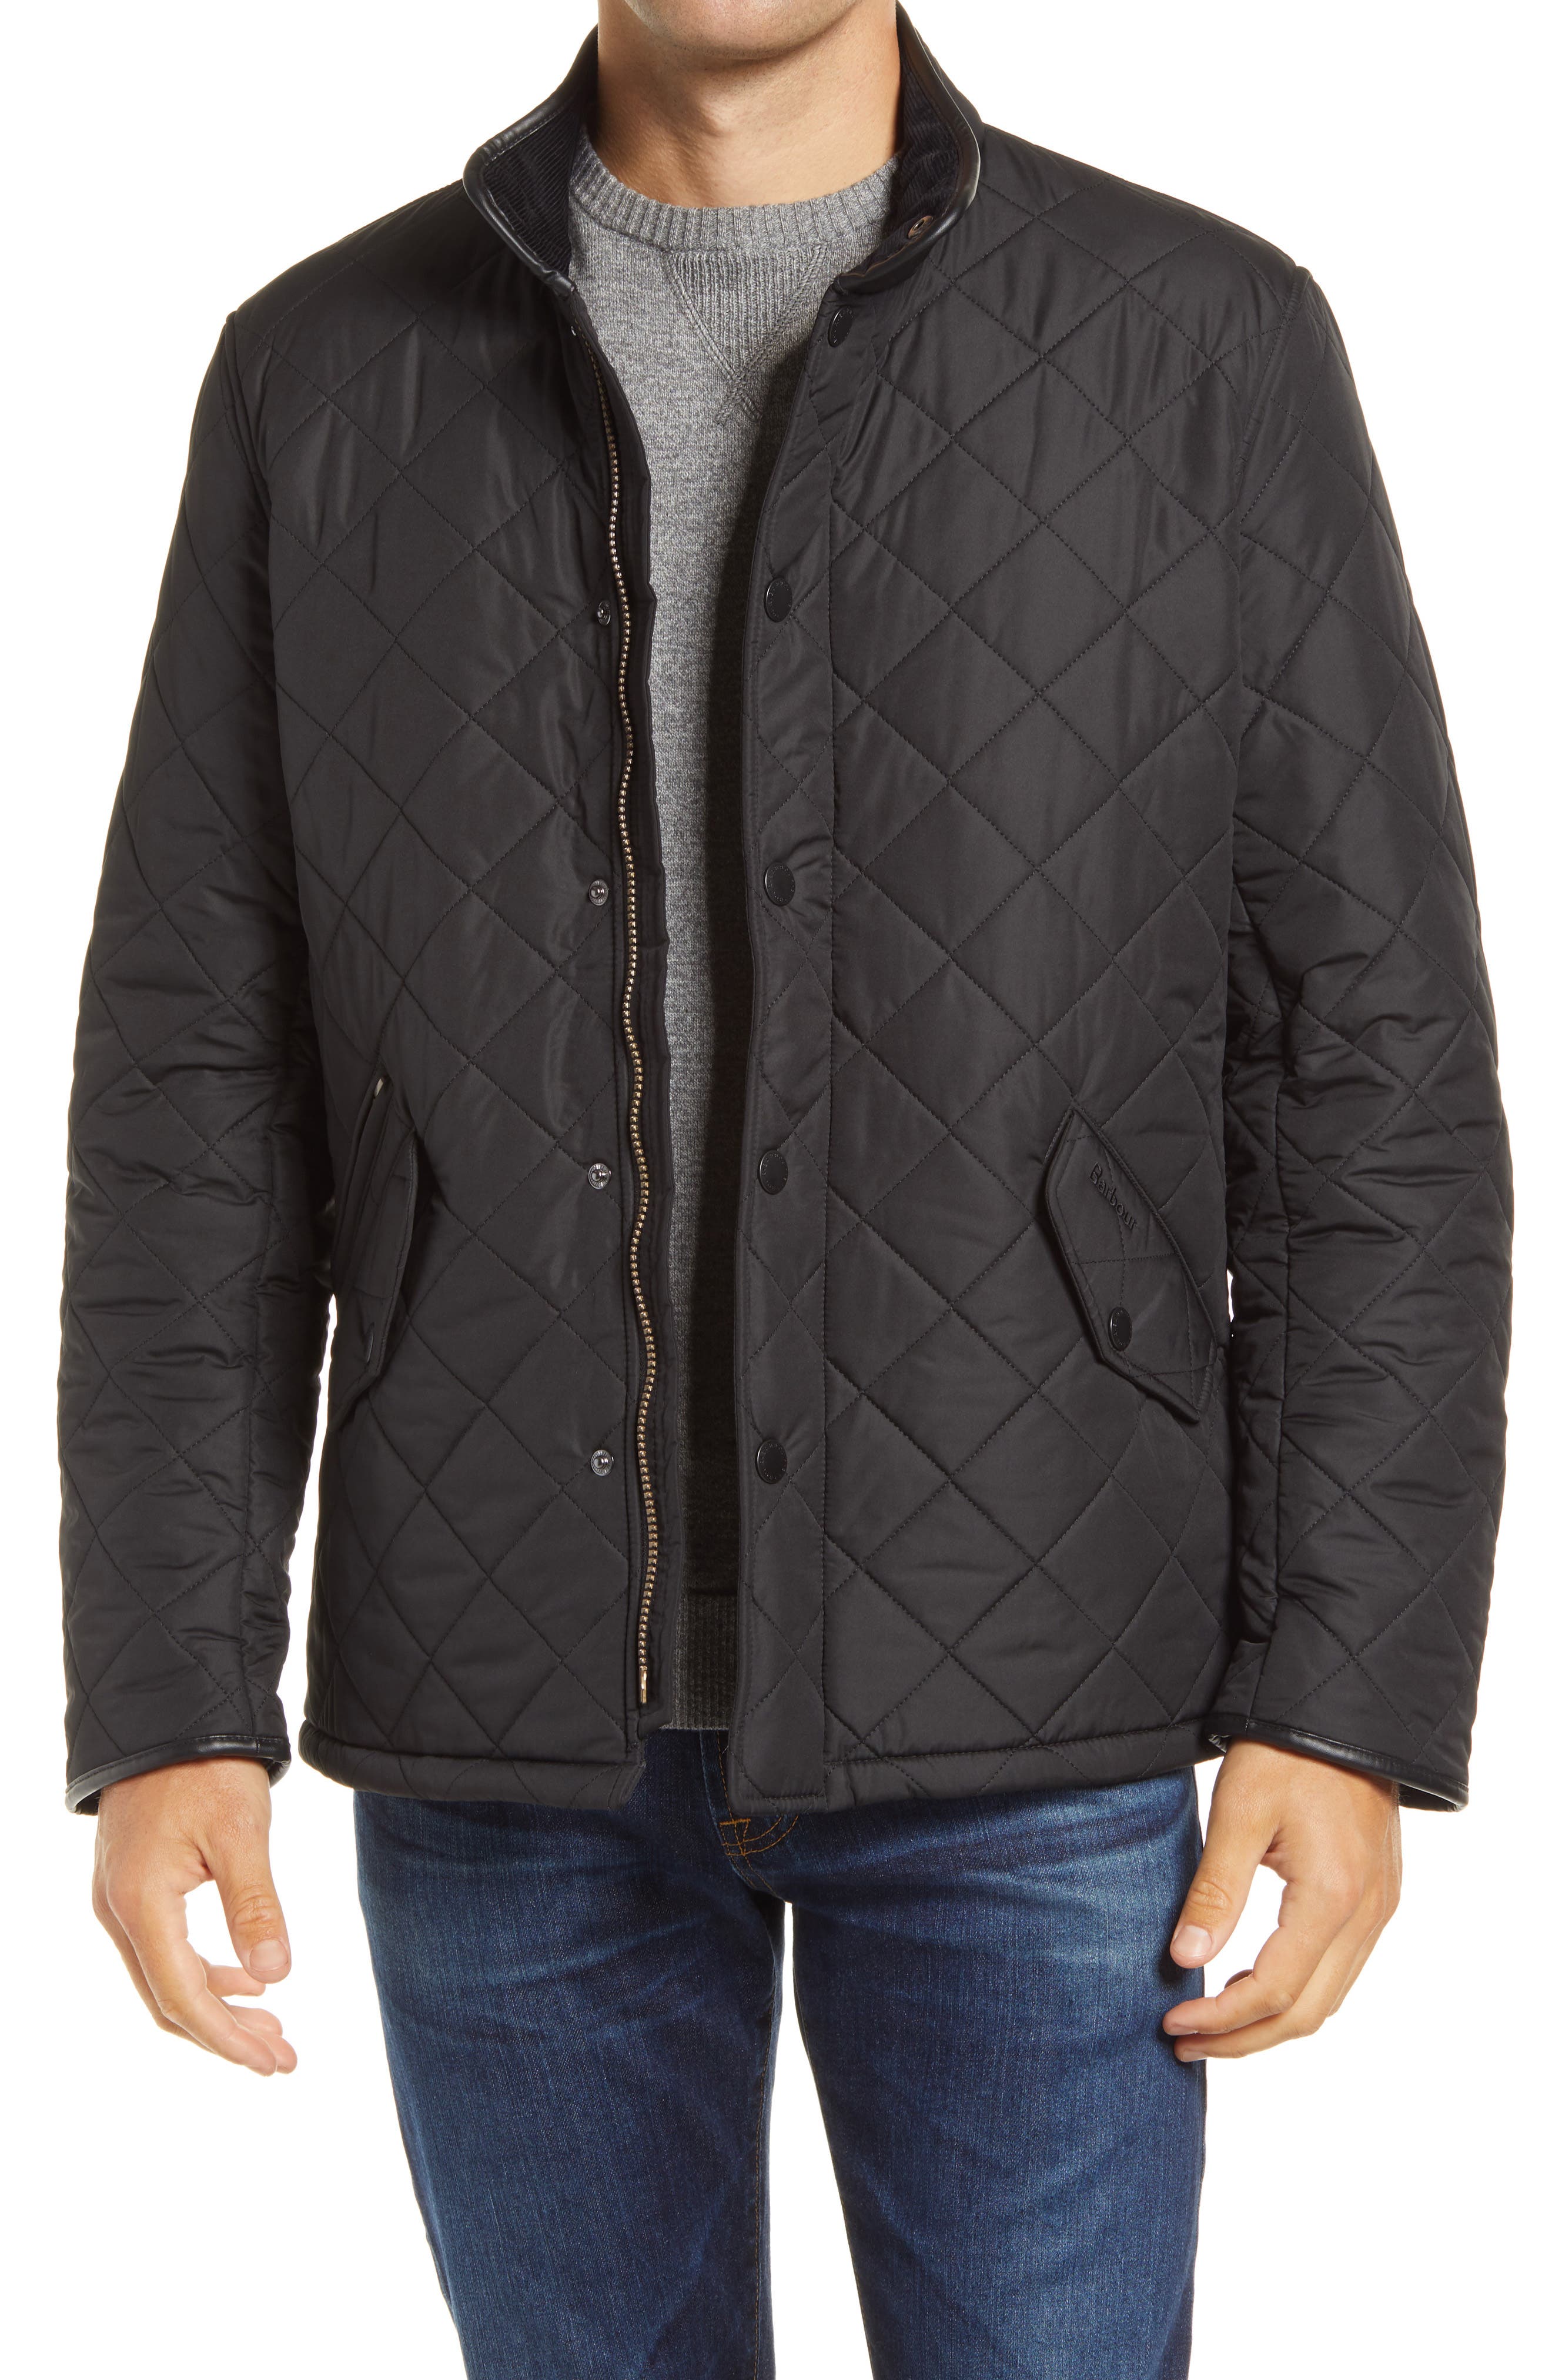 Barbour 'Powell' Regular Fit Quilted 